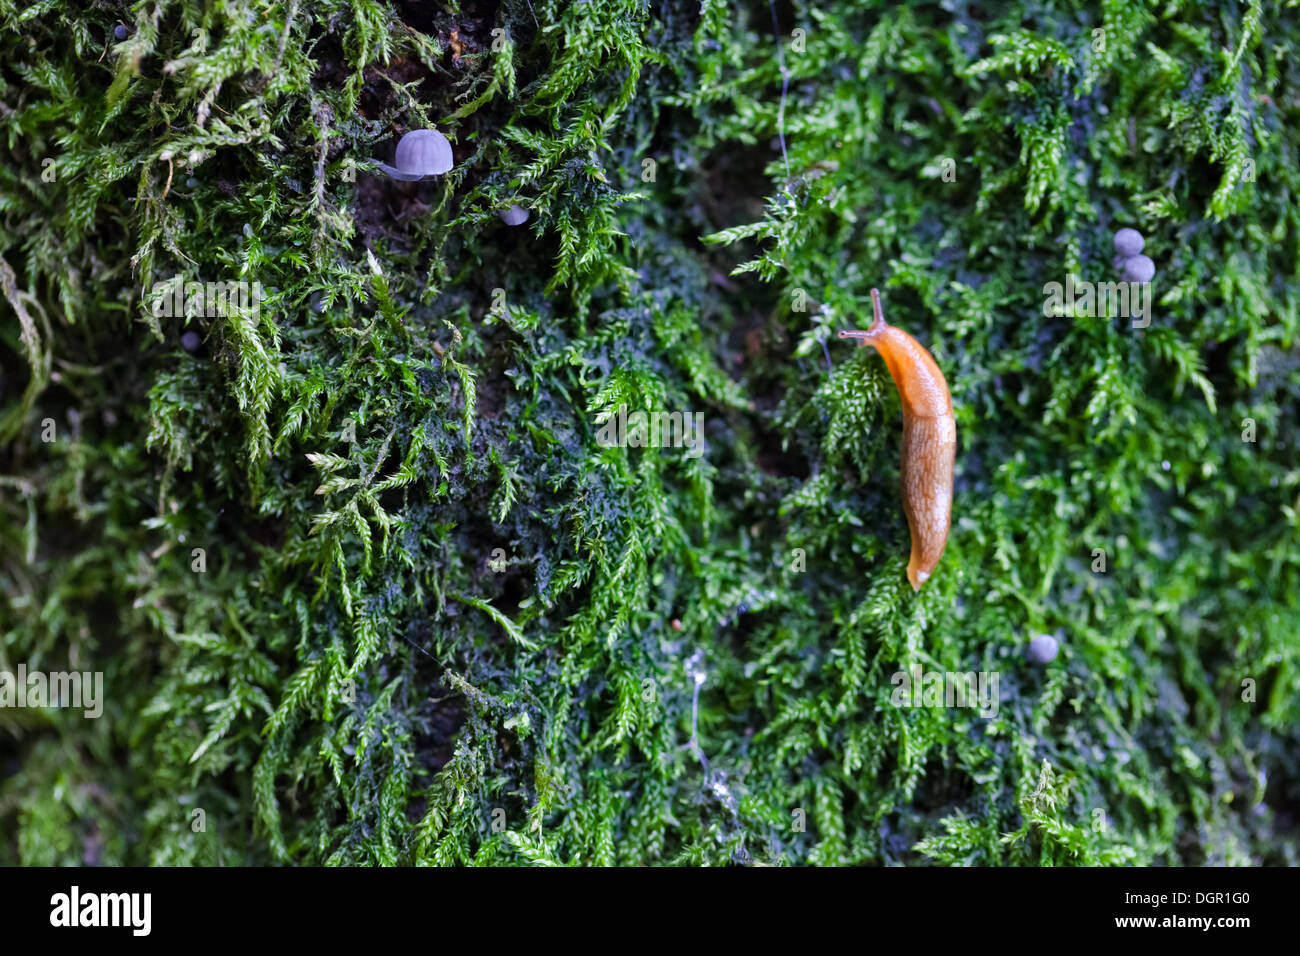 Baby slug climbing a moss covered tree which contains a number of small grey toadstools Stock Photo